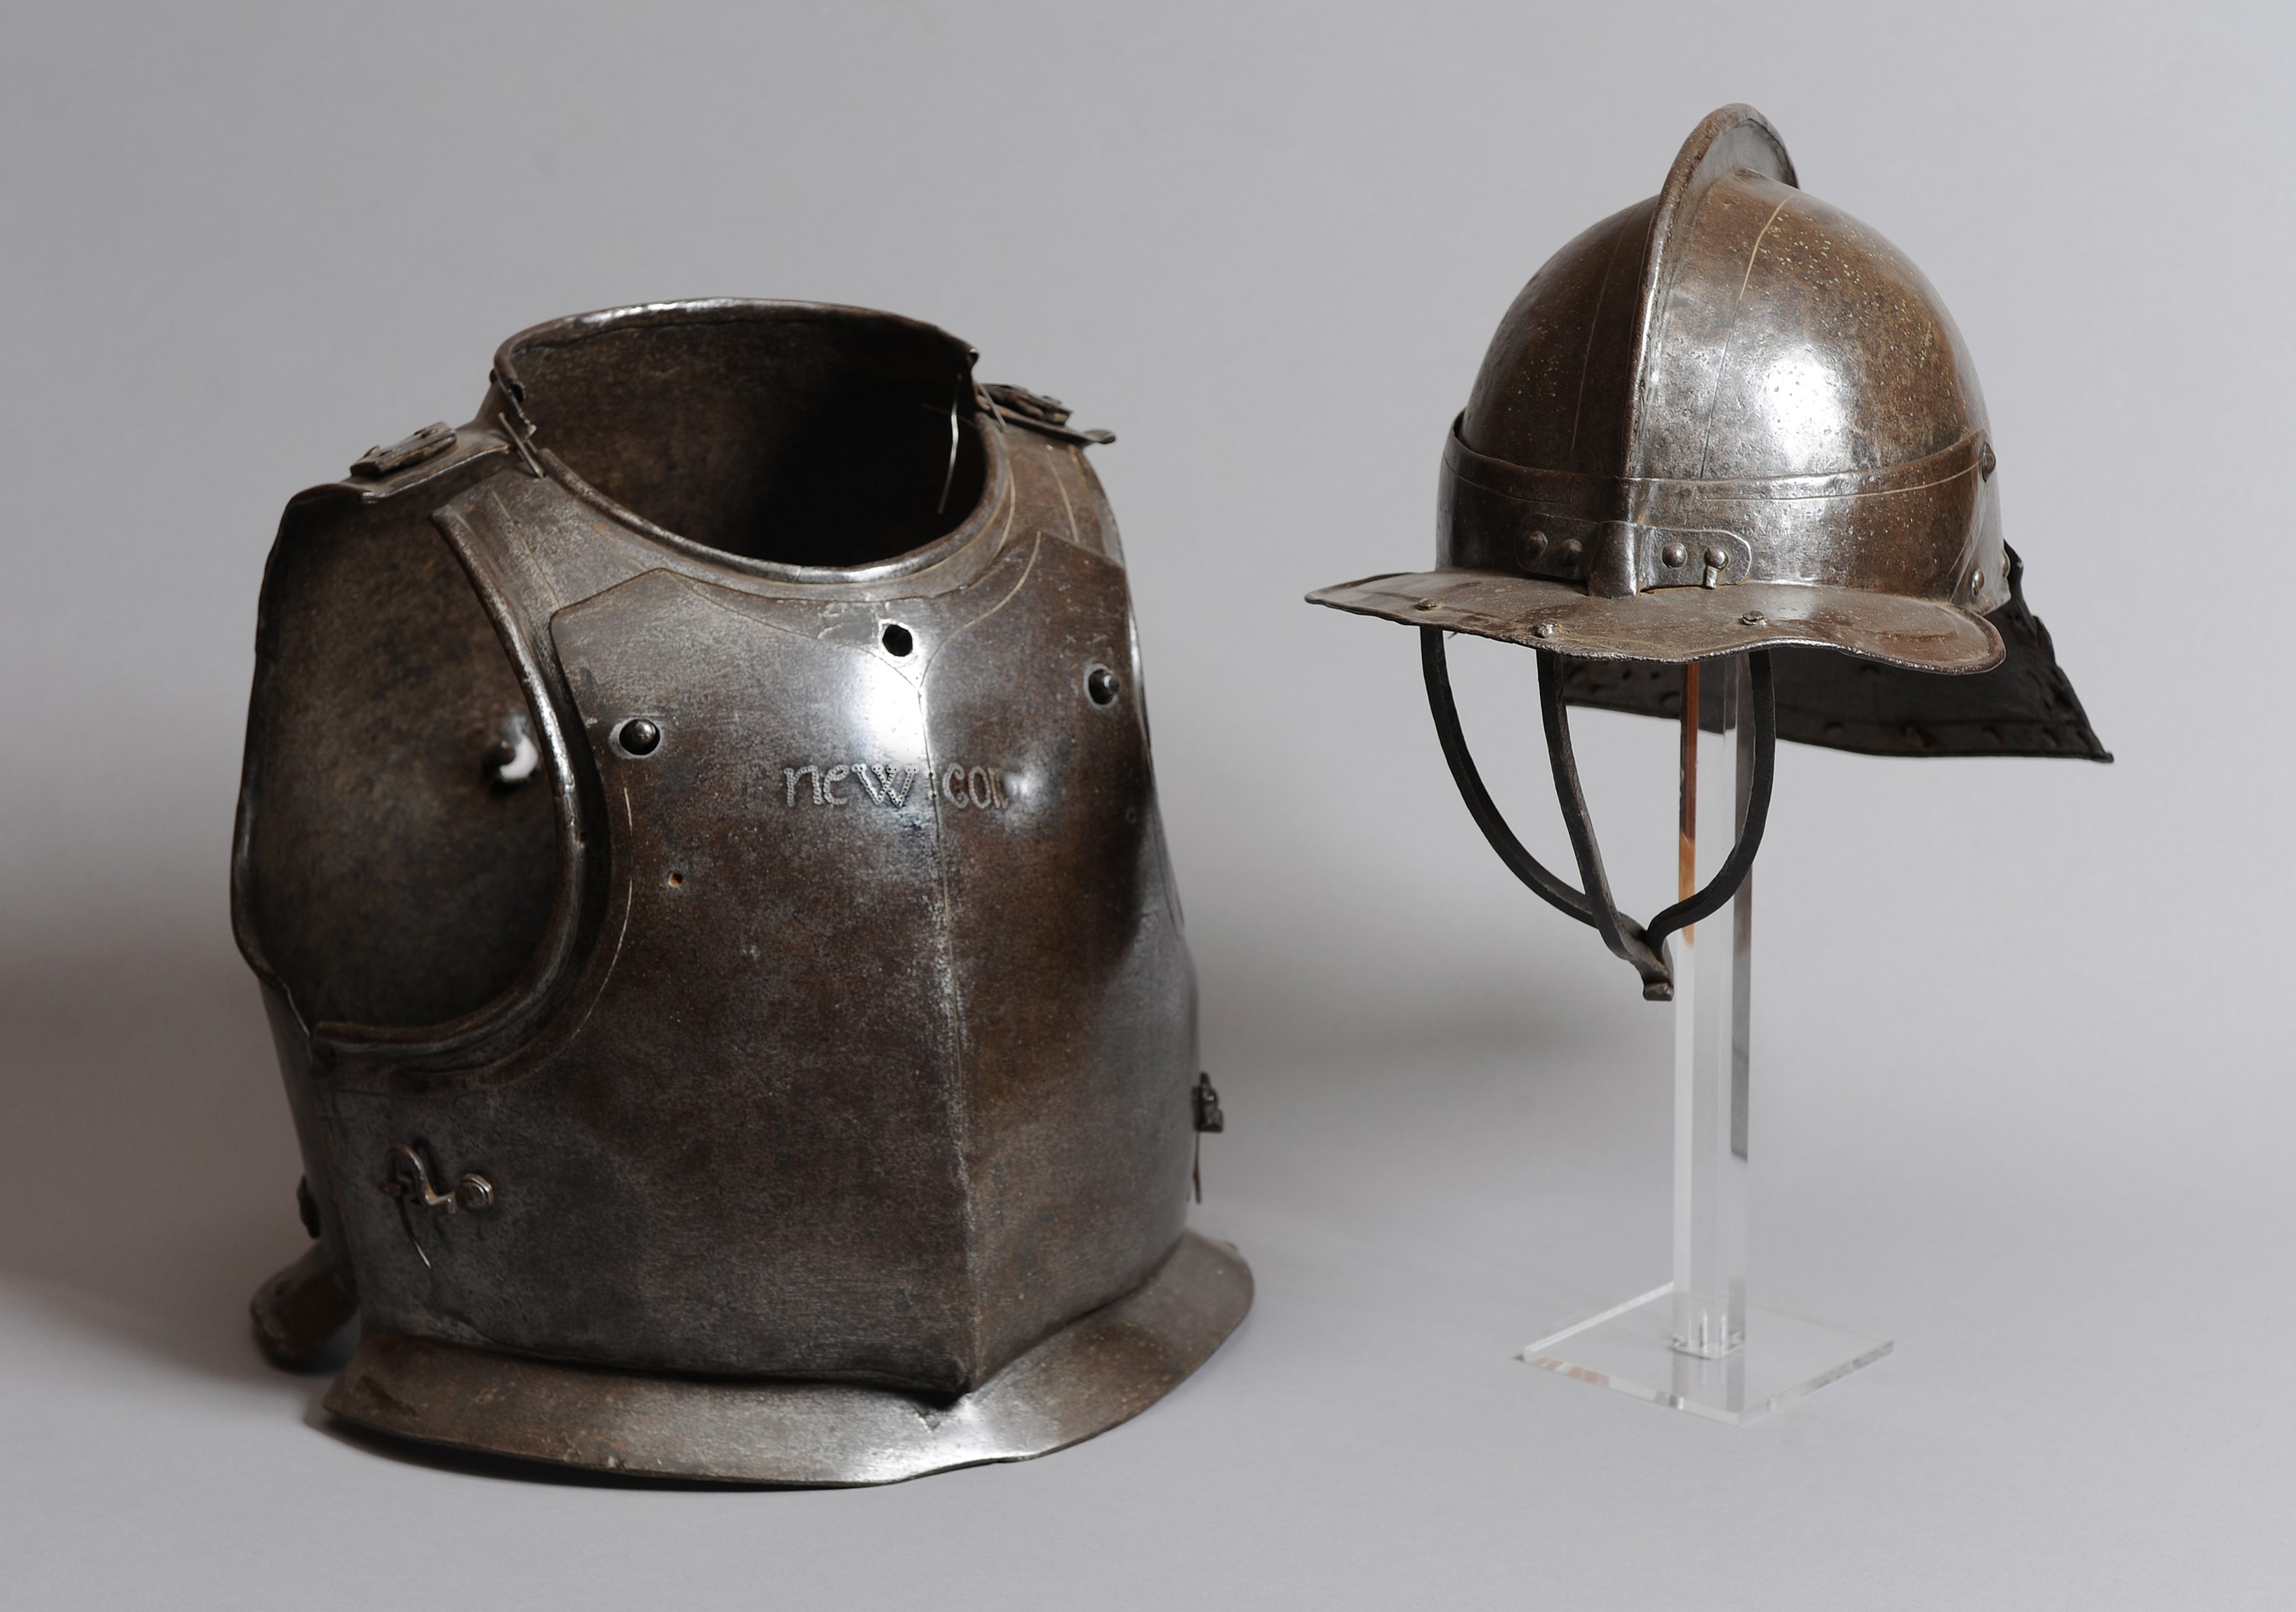 New College Civil War armour and helmet